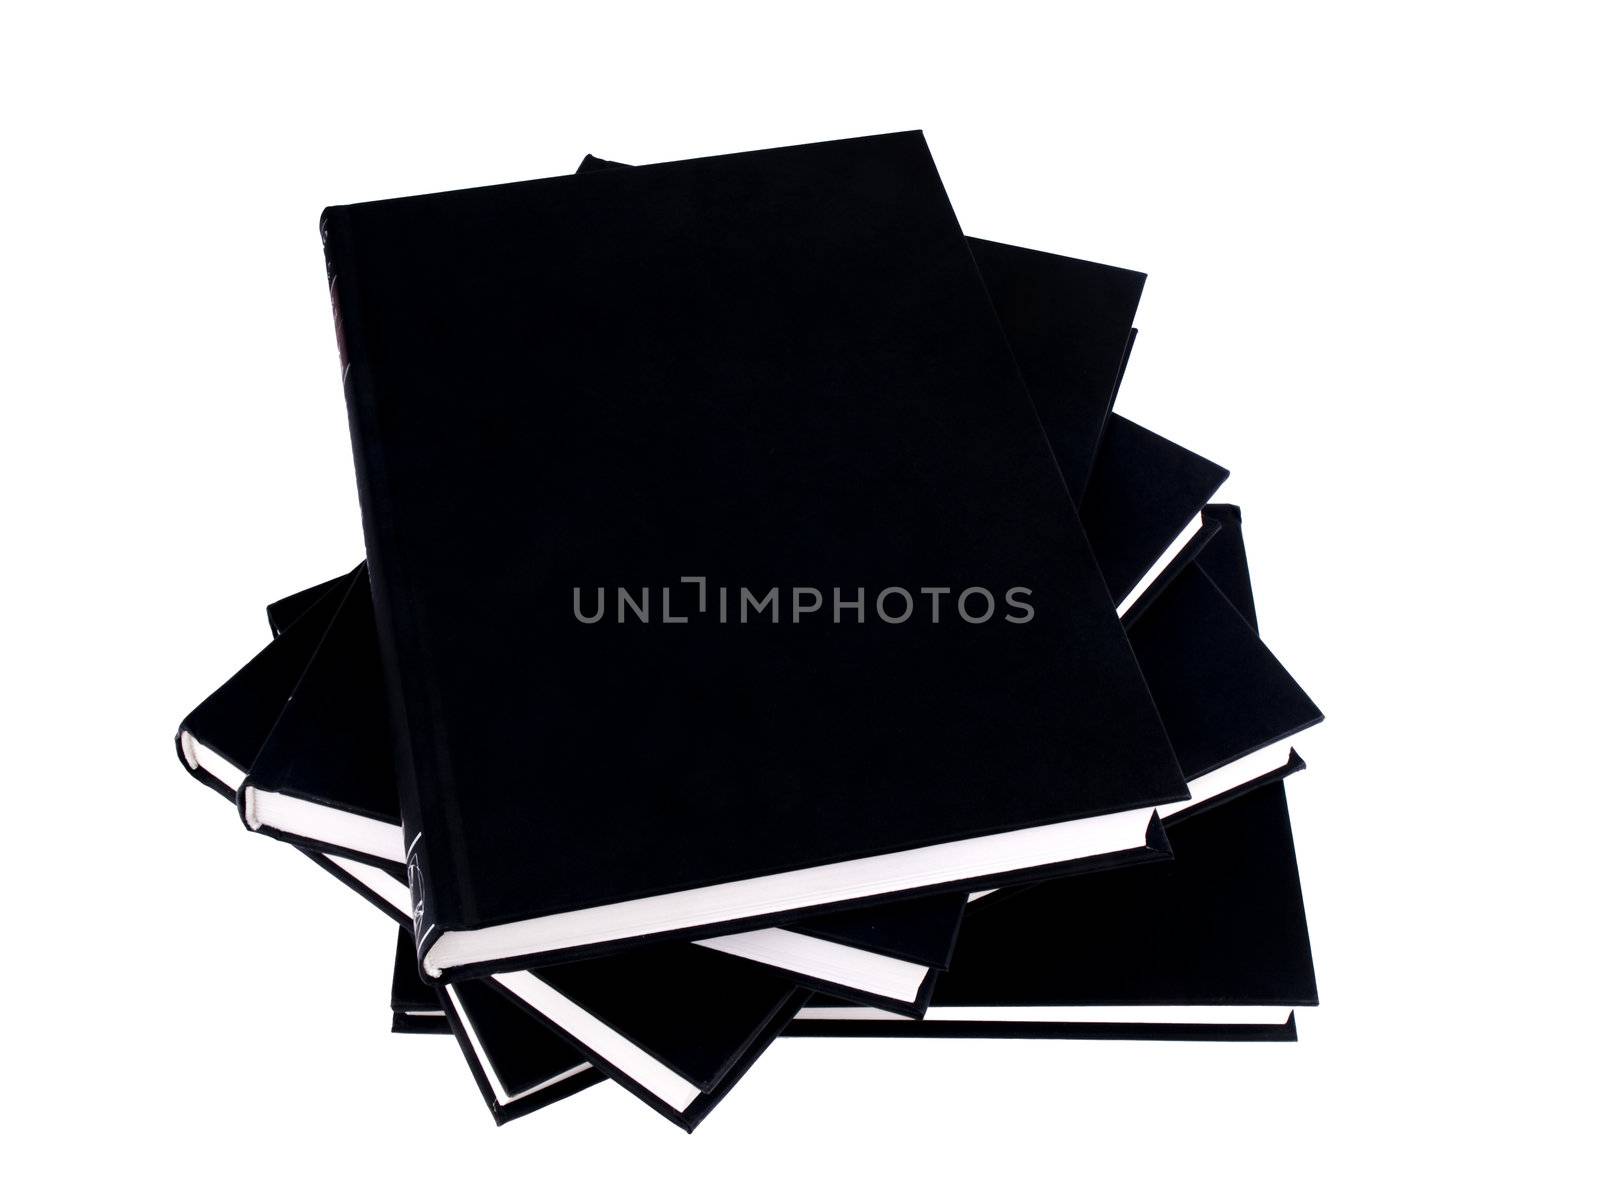 Pack of books in black covers on white background